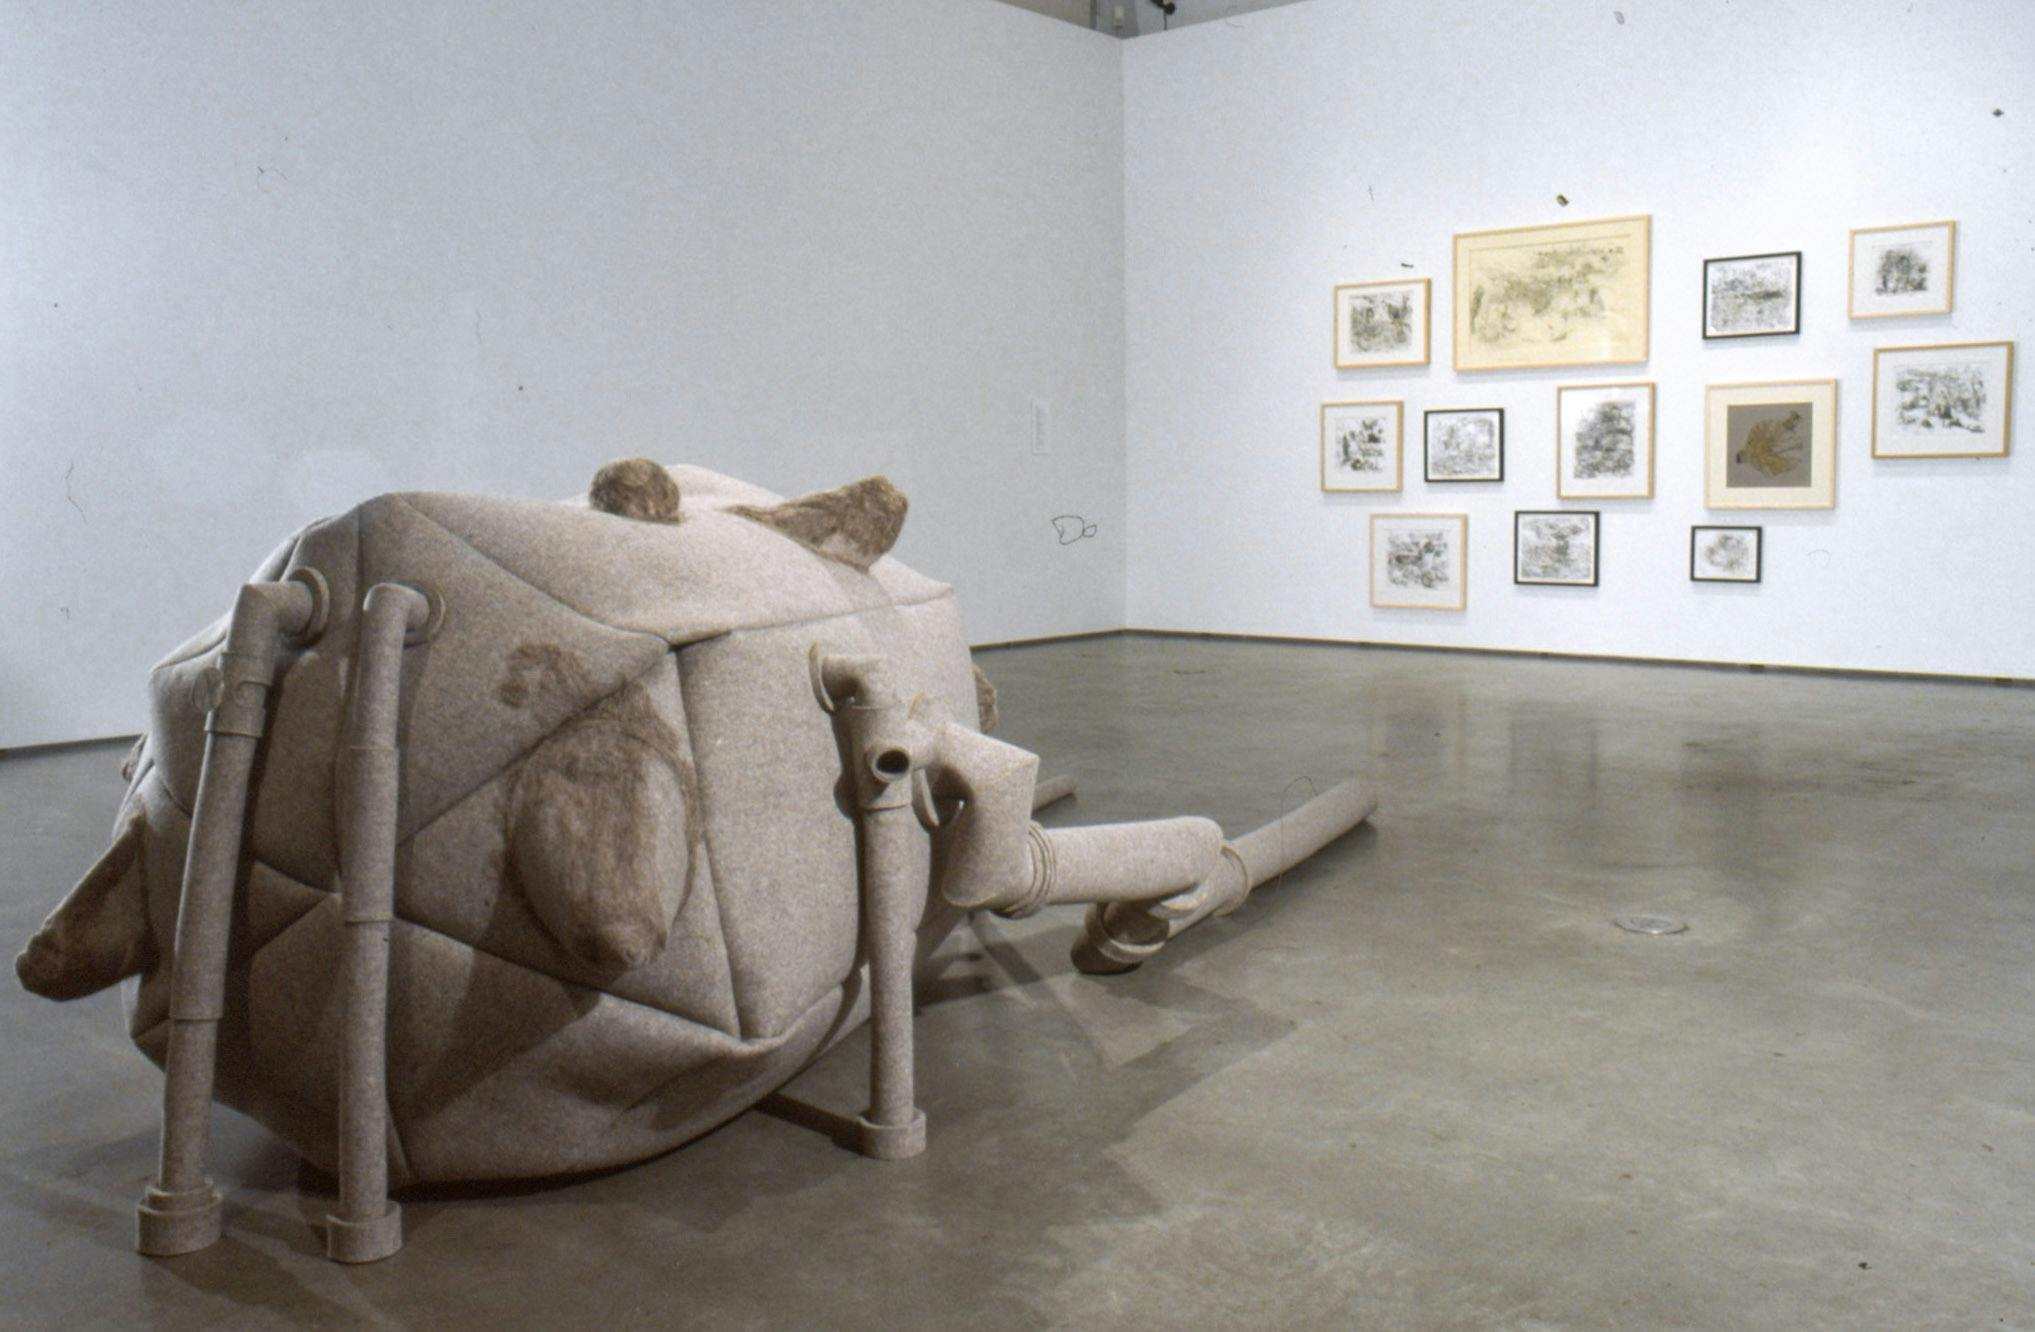 Installation image of Luanne Martineau’s art exhibition. A large soft sculptural installation is on the floor. It is made with brown fabric and has four legs. 12 framed illustrations are mounted on the back wall.